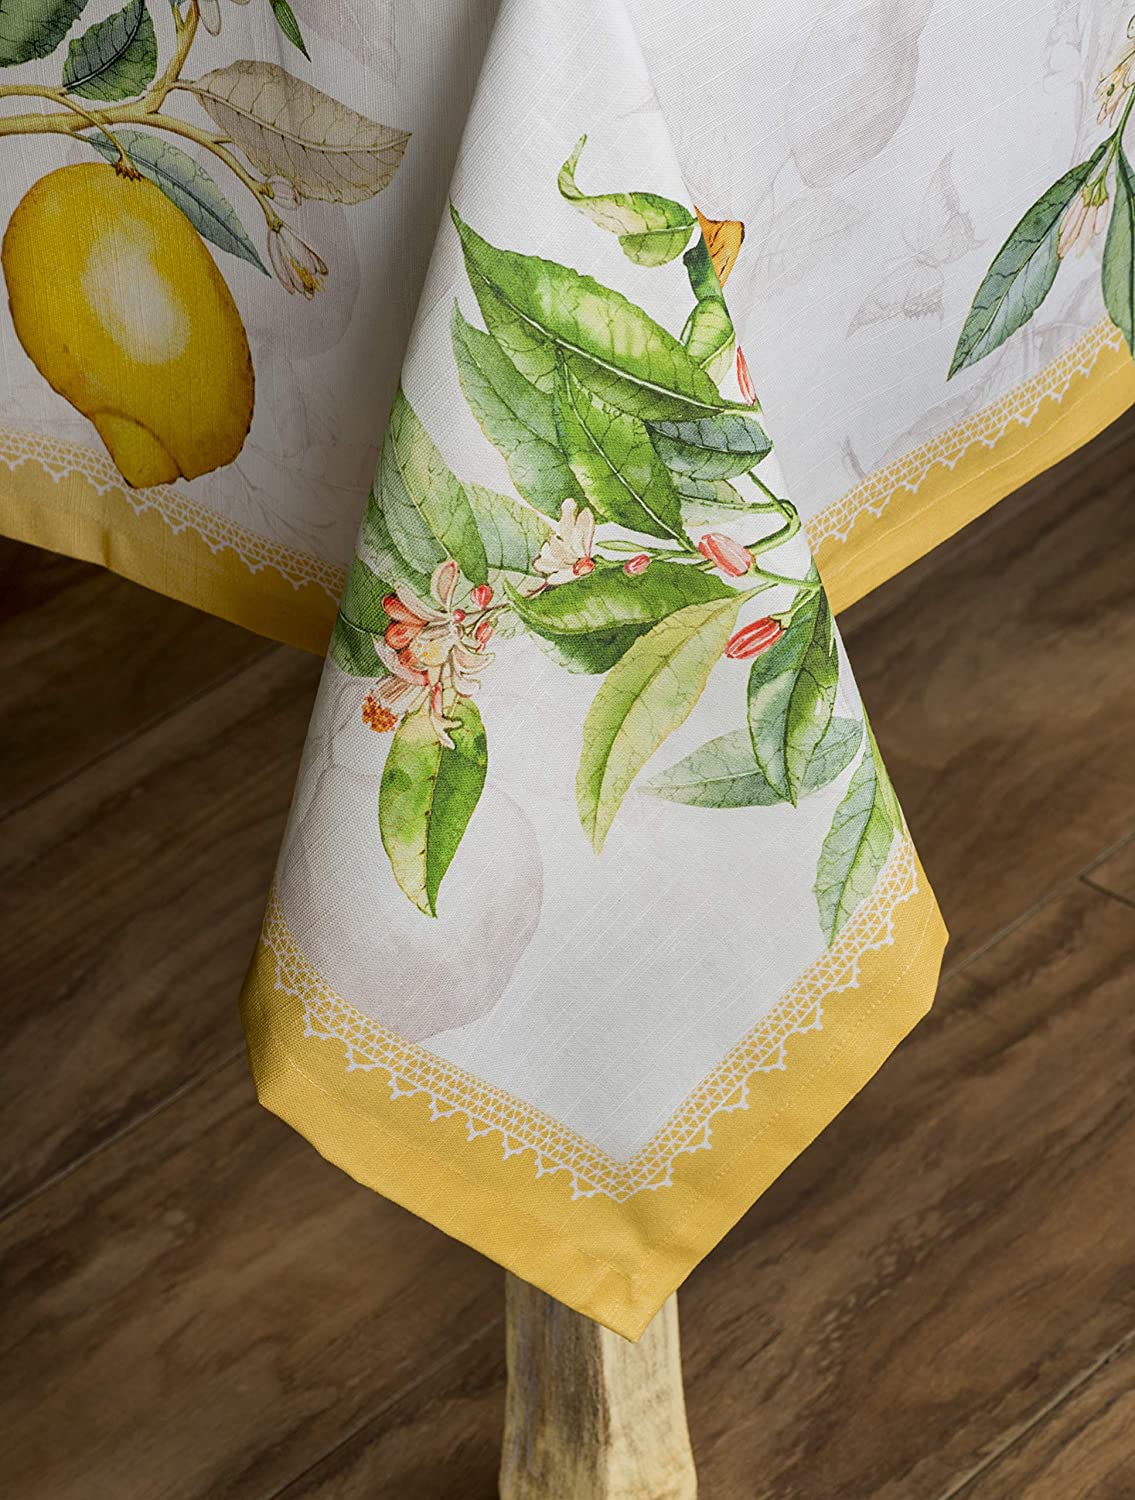 Lemon and Leaves 100% Cotton Tablecloth for Kitchen Dining